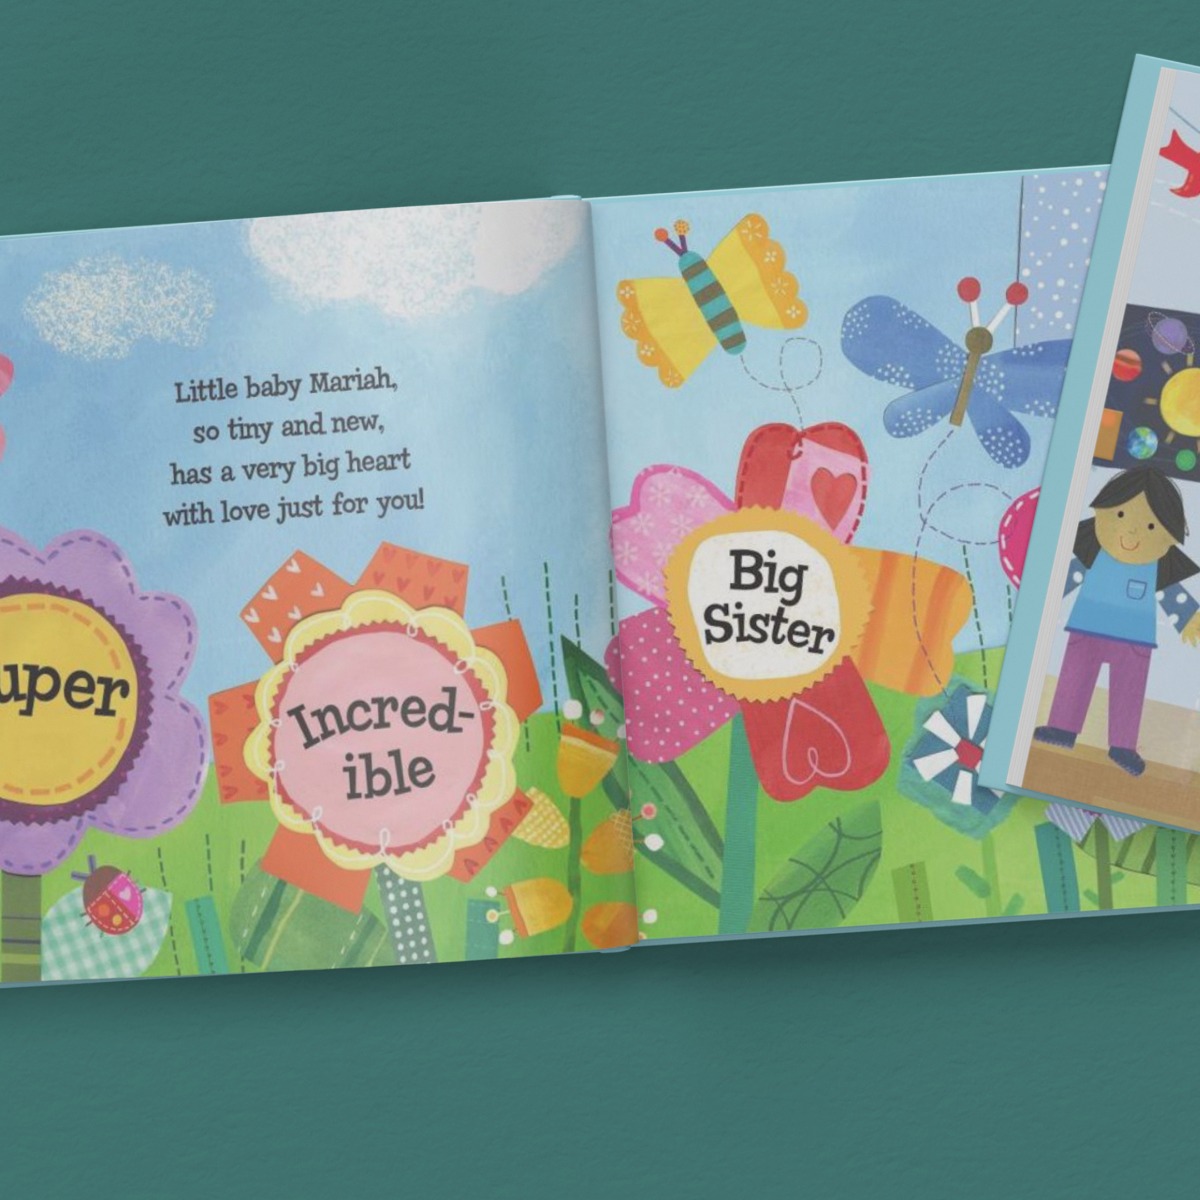 The Super, Incredible Big Sister Personalized Book and Medal